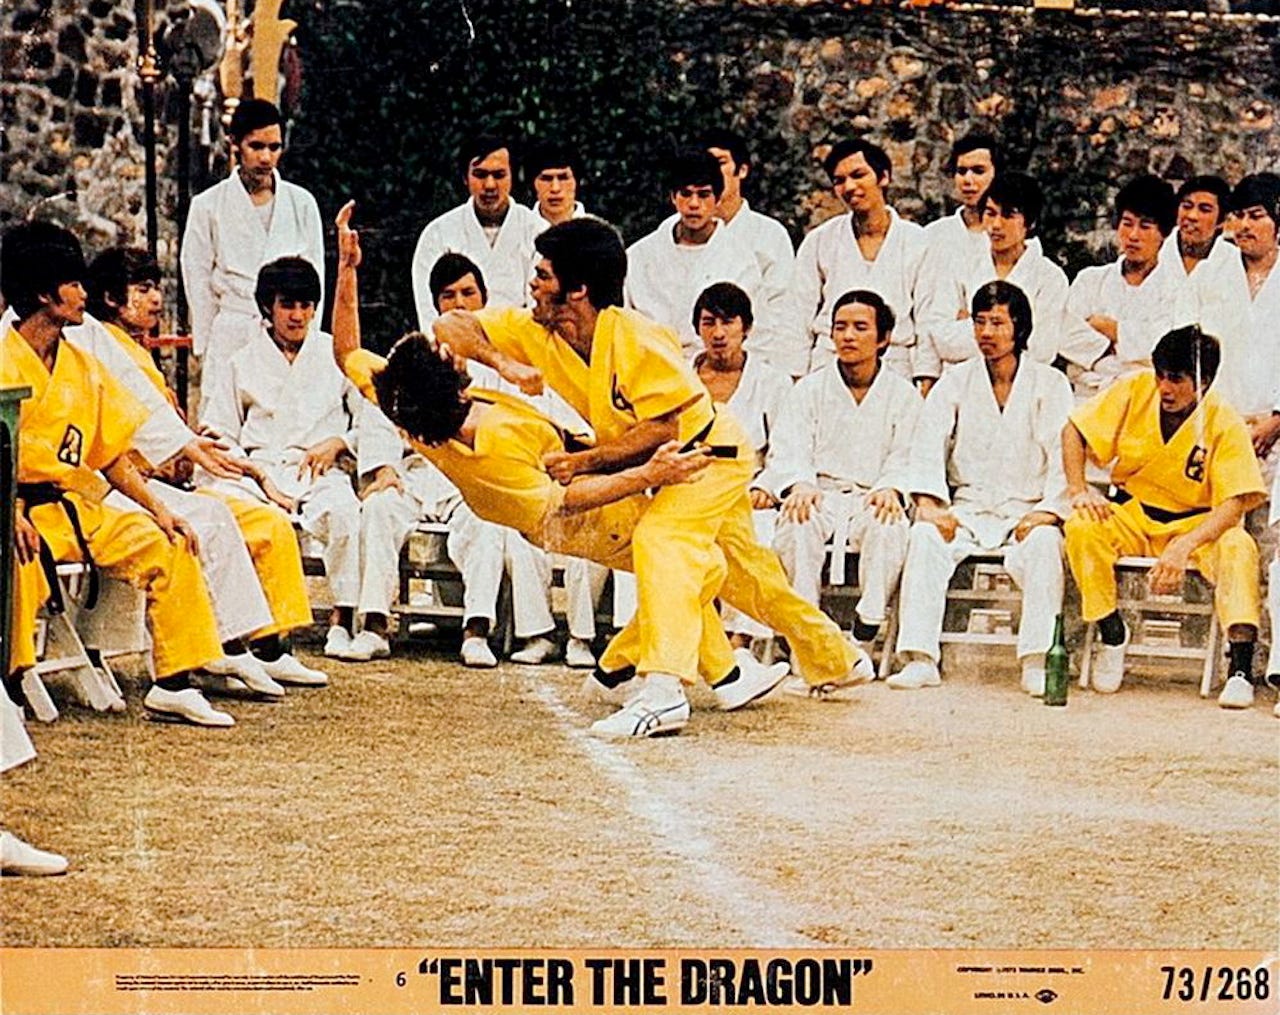 Martial Arts Movie Stars Bruce Lee & Jim Kelly Wore Onitsuka Tiger Sneakers  | by Paco Taylor | Medium